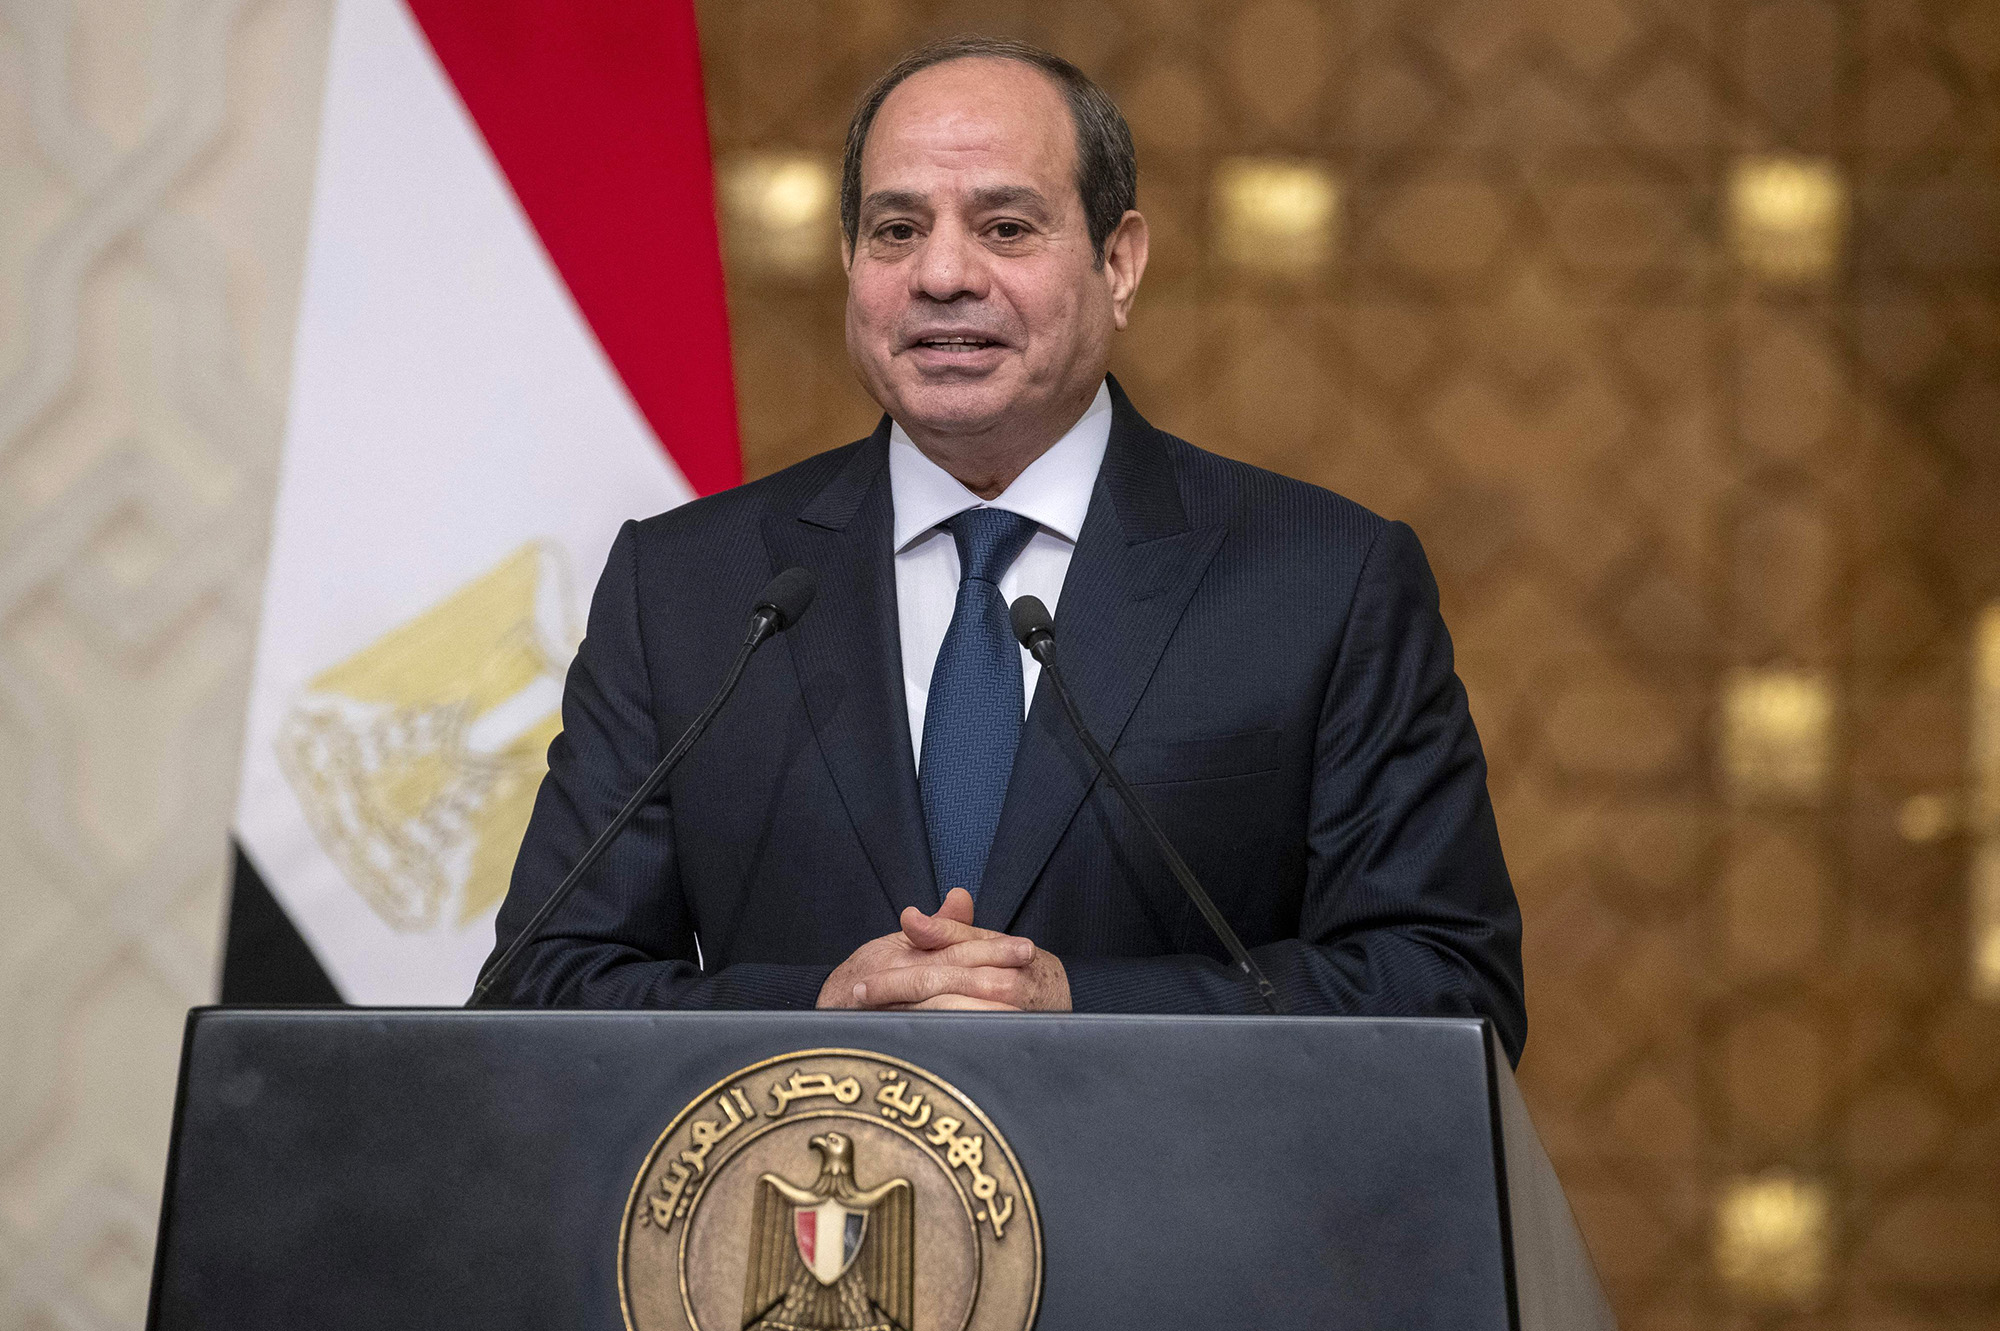 Egypt's President Abdul Fatah El-Sisi talks to the press after a meeting at the Palace in Cairo on November 24.